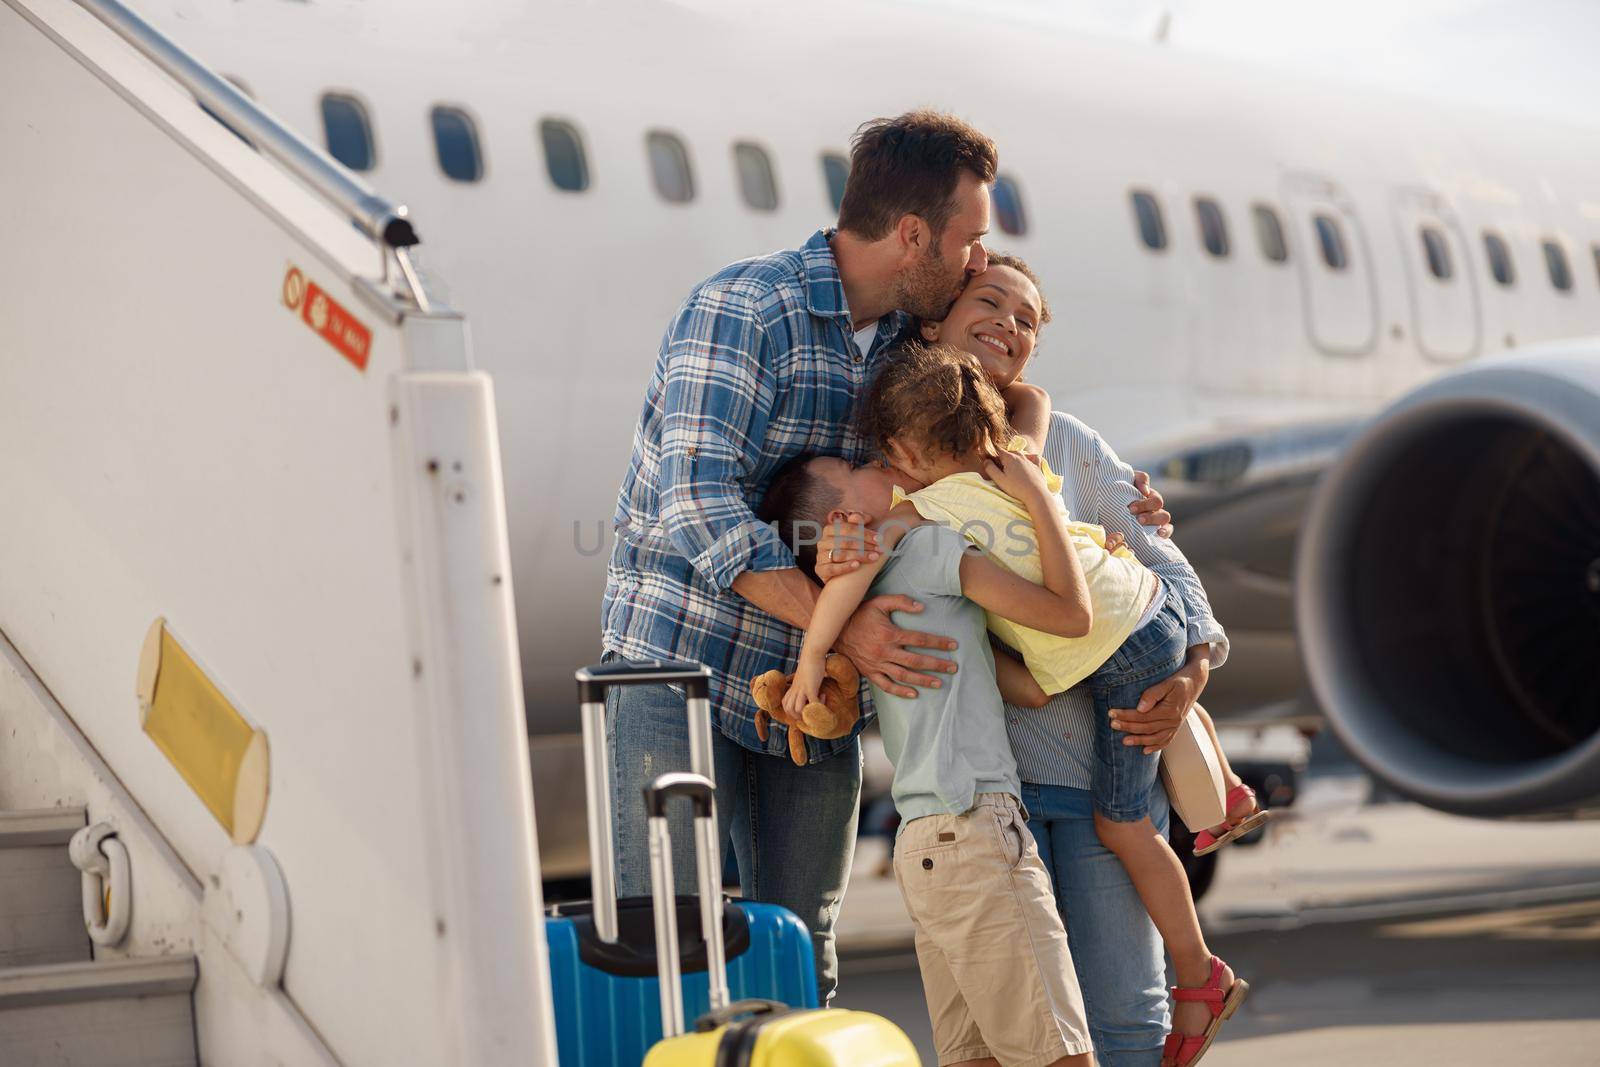 Family of four kissing each other while going on a trip, standing in front of big airplane outdoors by Yaroslav_astakhov